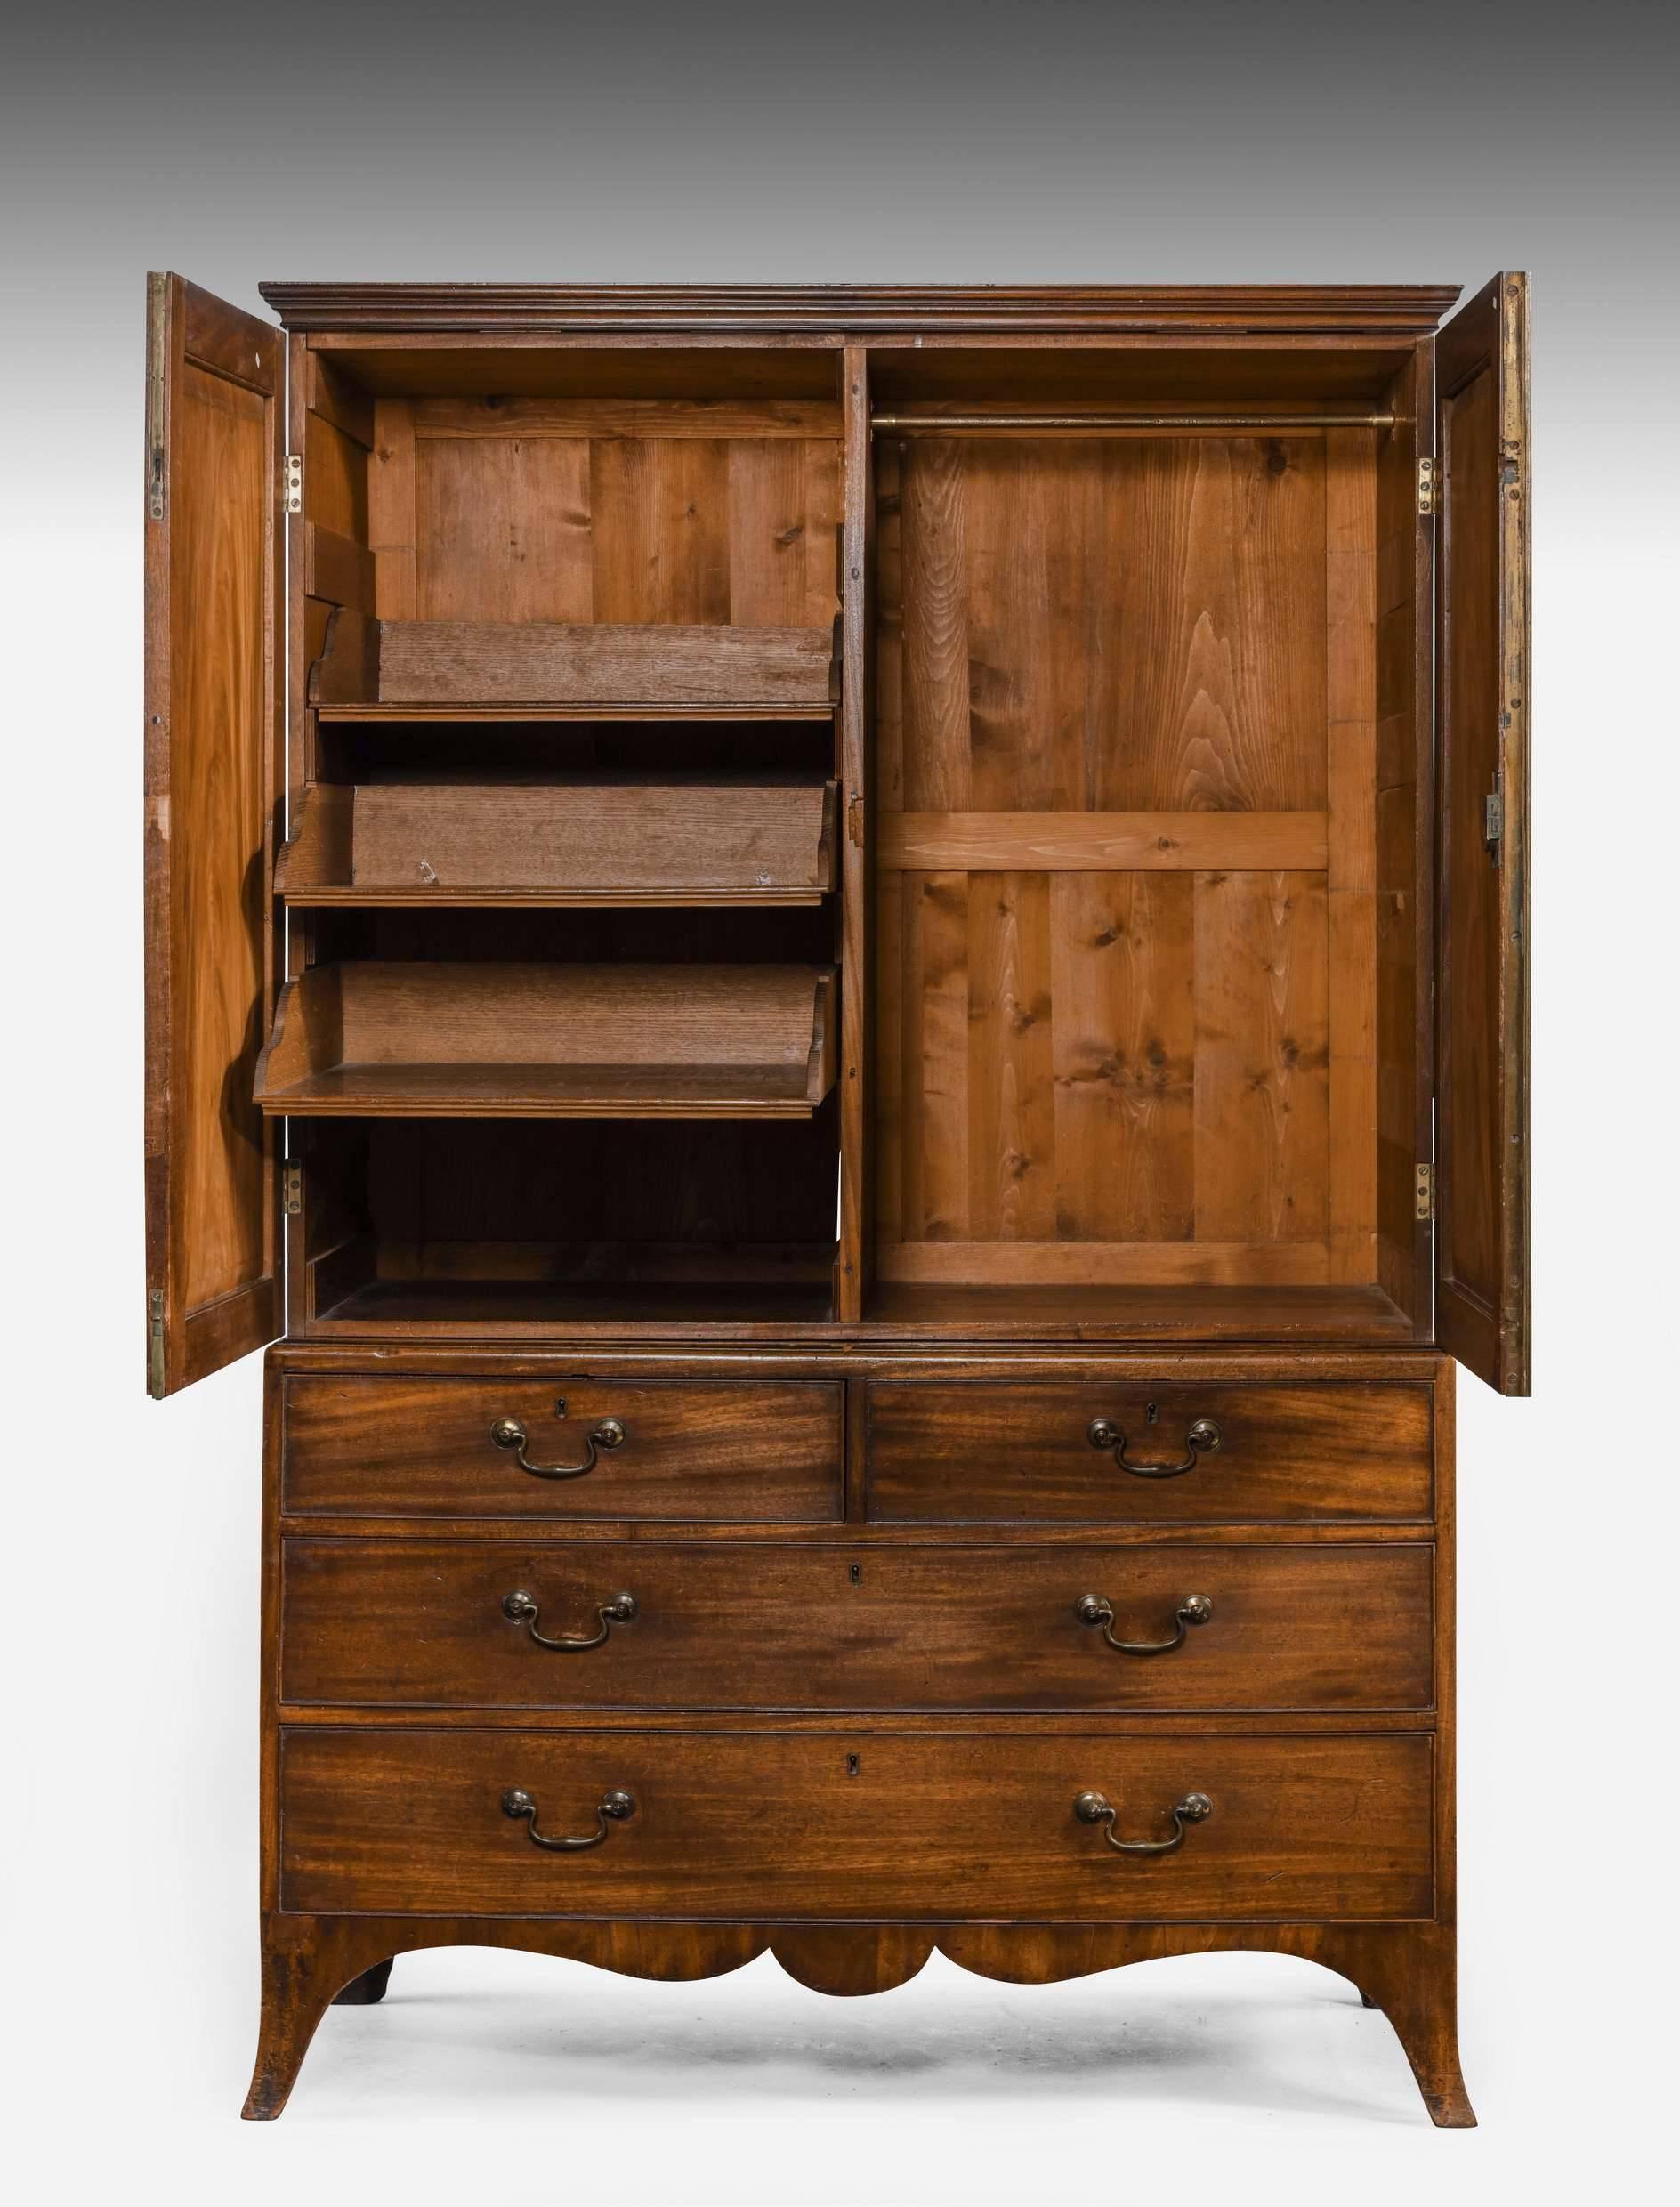 George III Period Mahogany Press with Original Sliding Oak Shelves In Excellent Condition In Peterborough, Northamptonshire